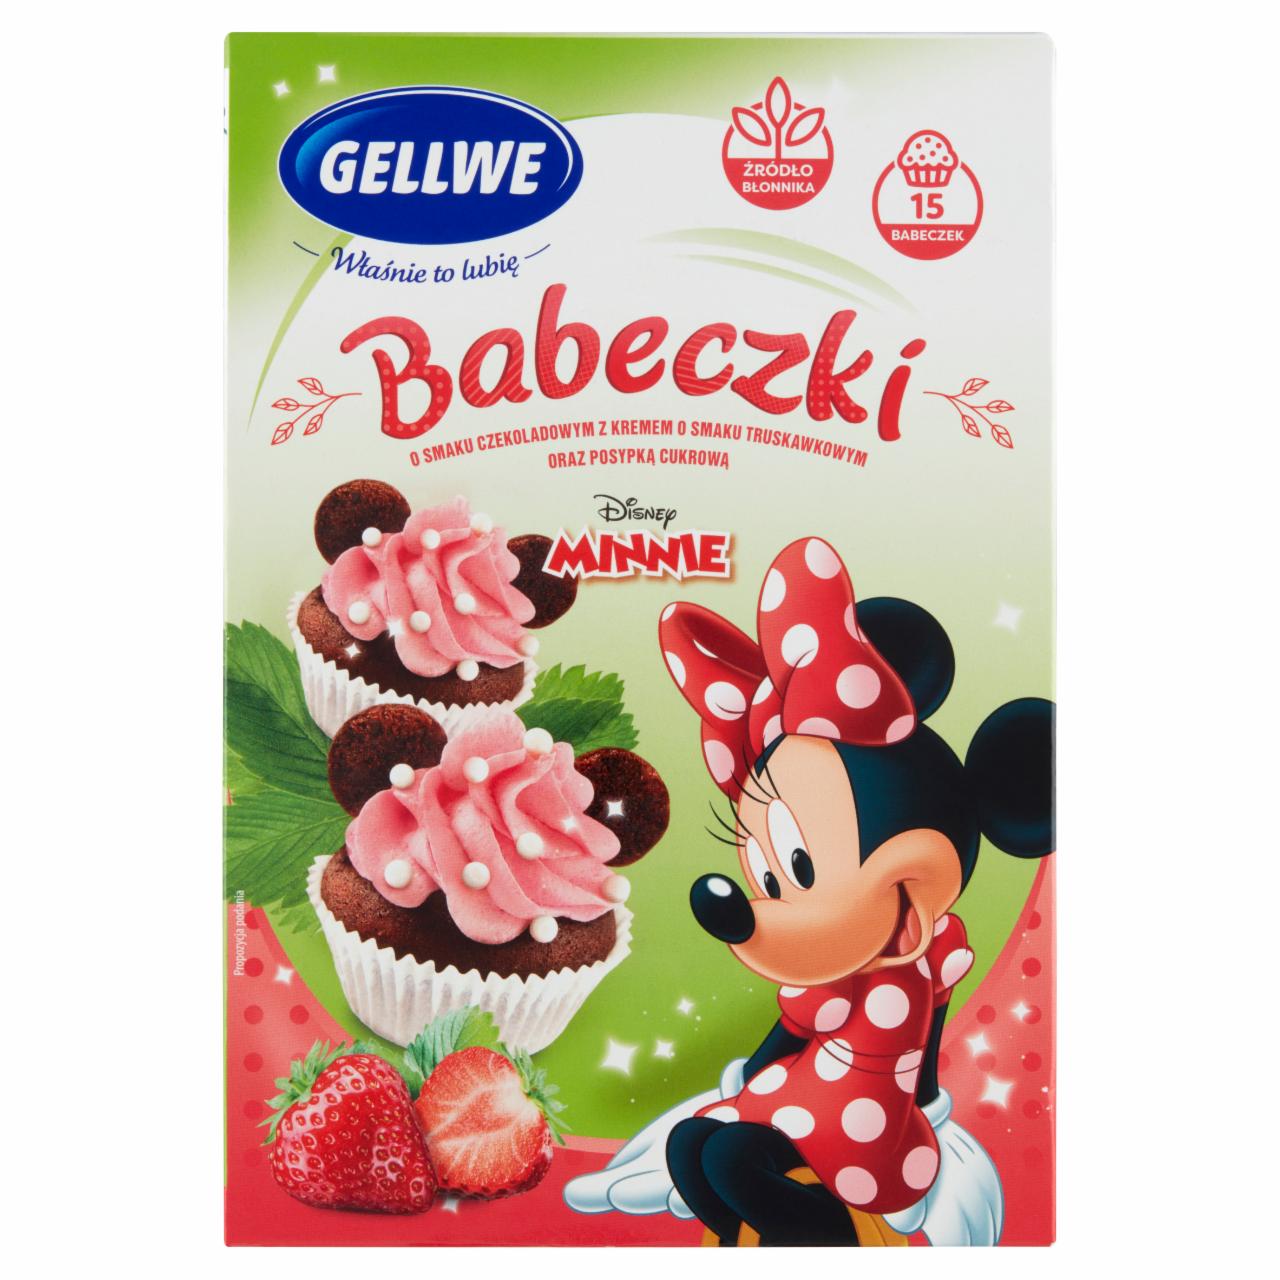 Photo - Gellwe Minnie Chocolate Flavoured with Strawberry Cream and Sprinkles Cupcakes 230 g